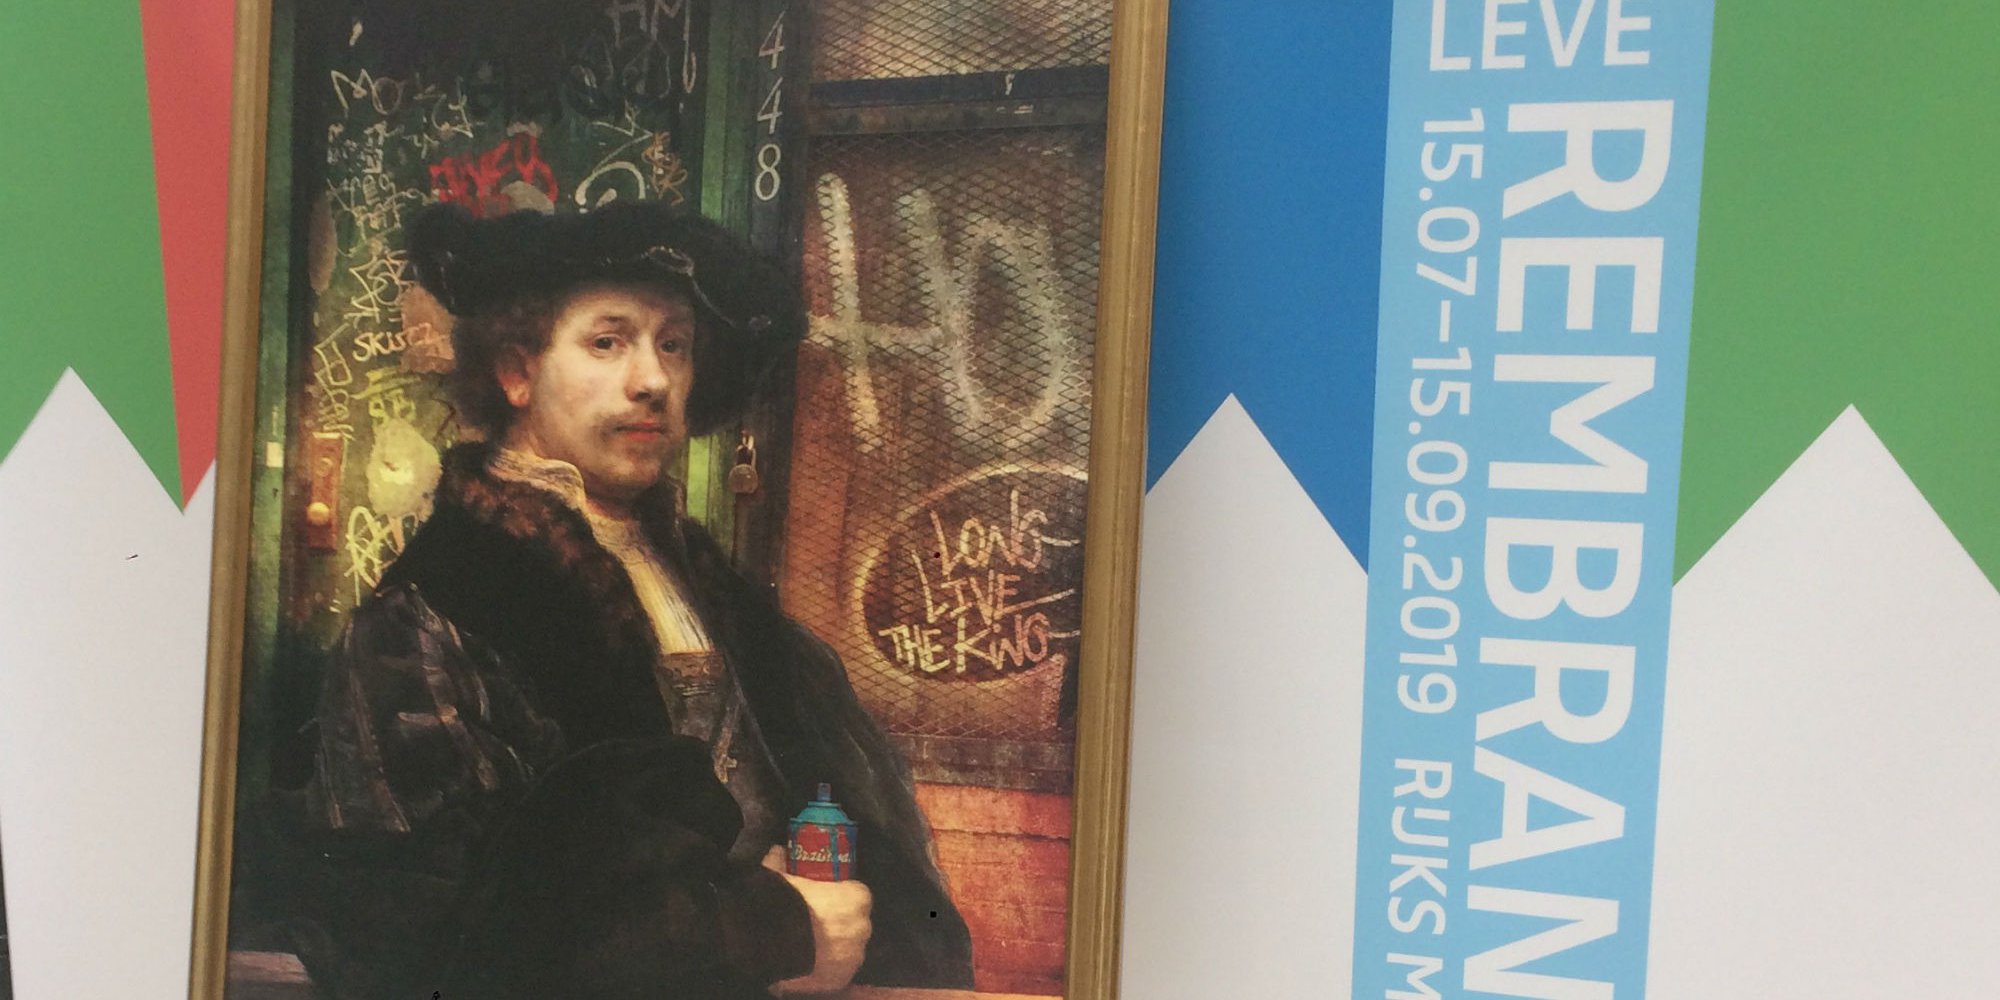 Rembrandt using spray paint?! It’s more likely than you think!